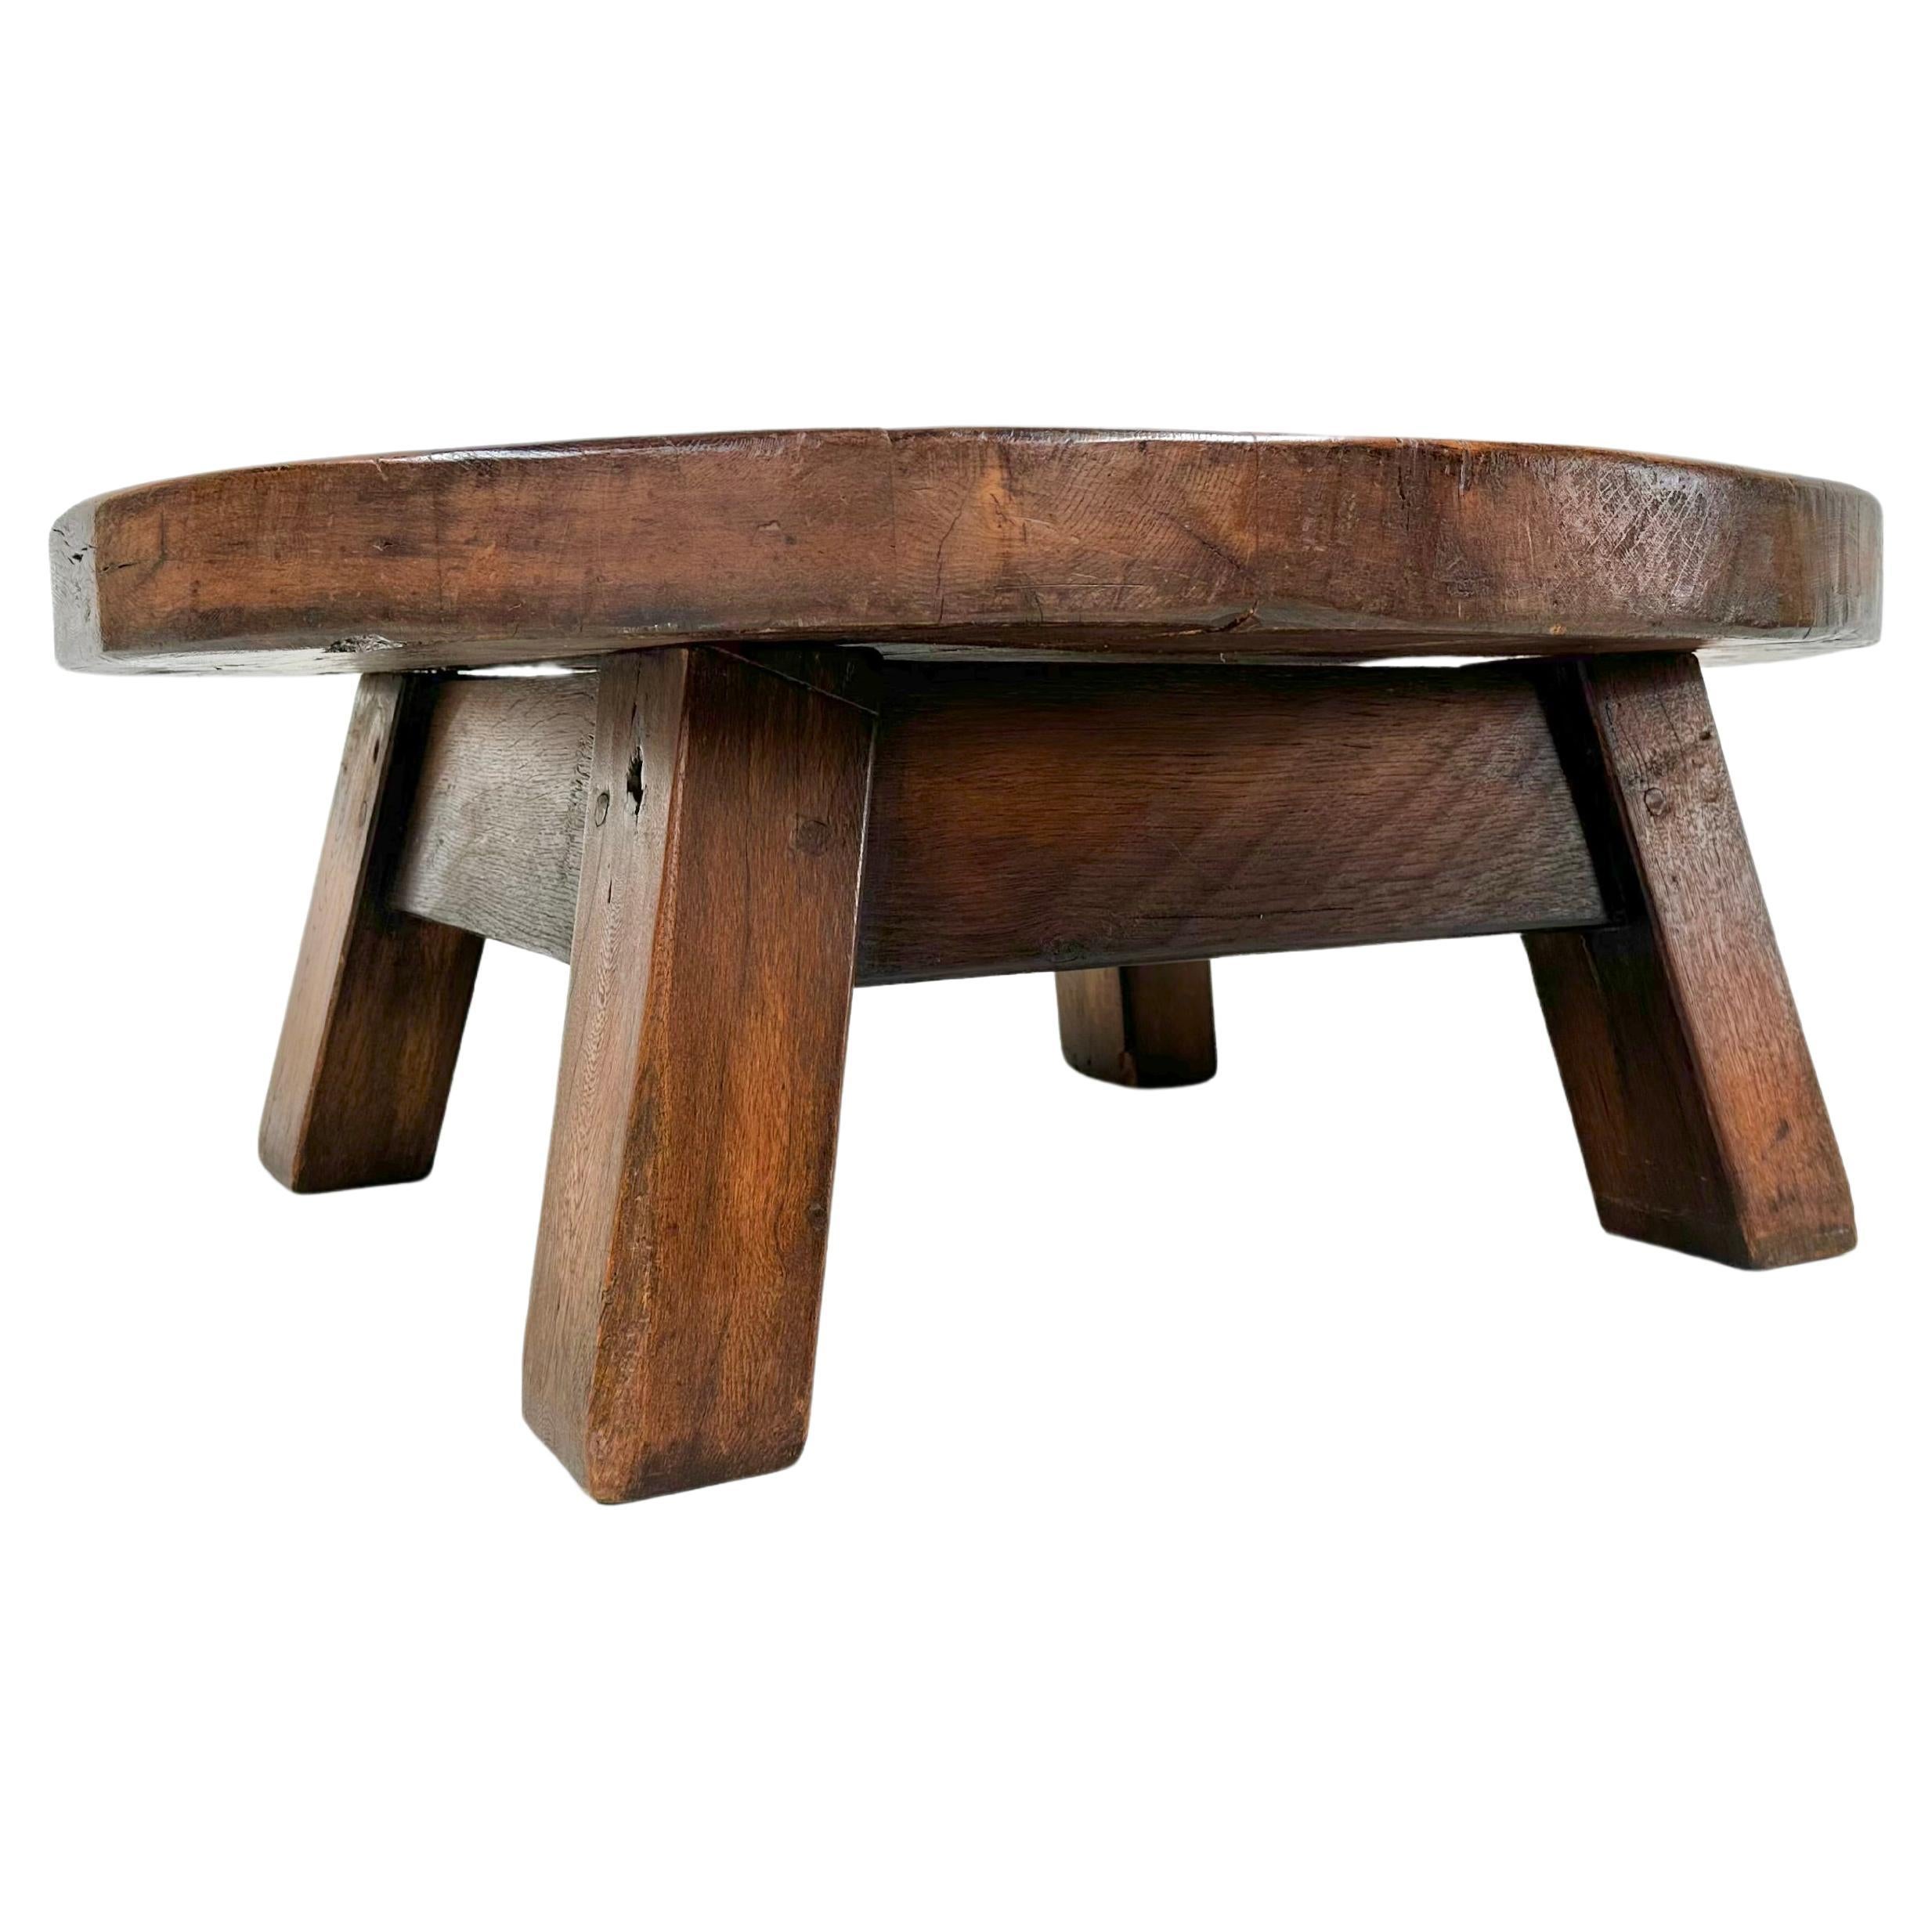 French Antique Oak Brutalist Coffee Table, 1920s. For Sale